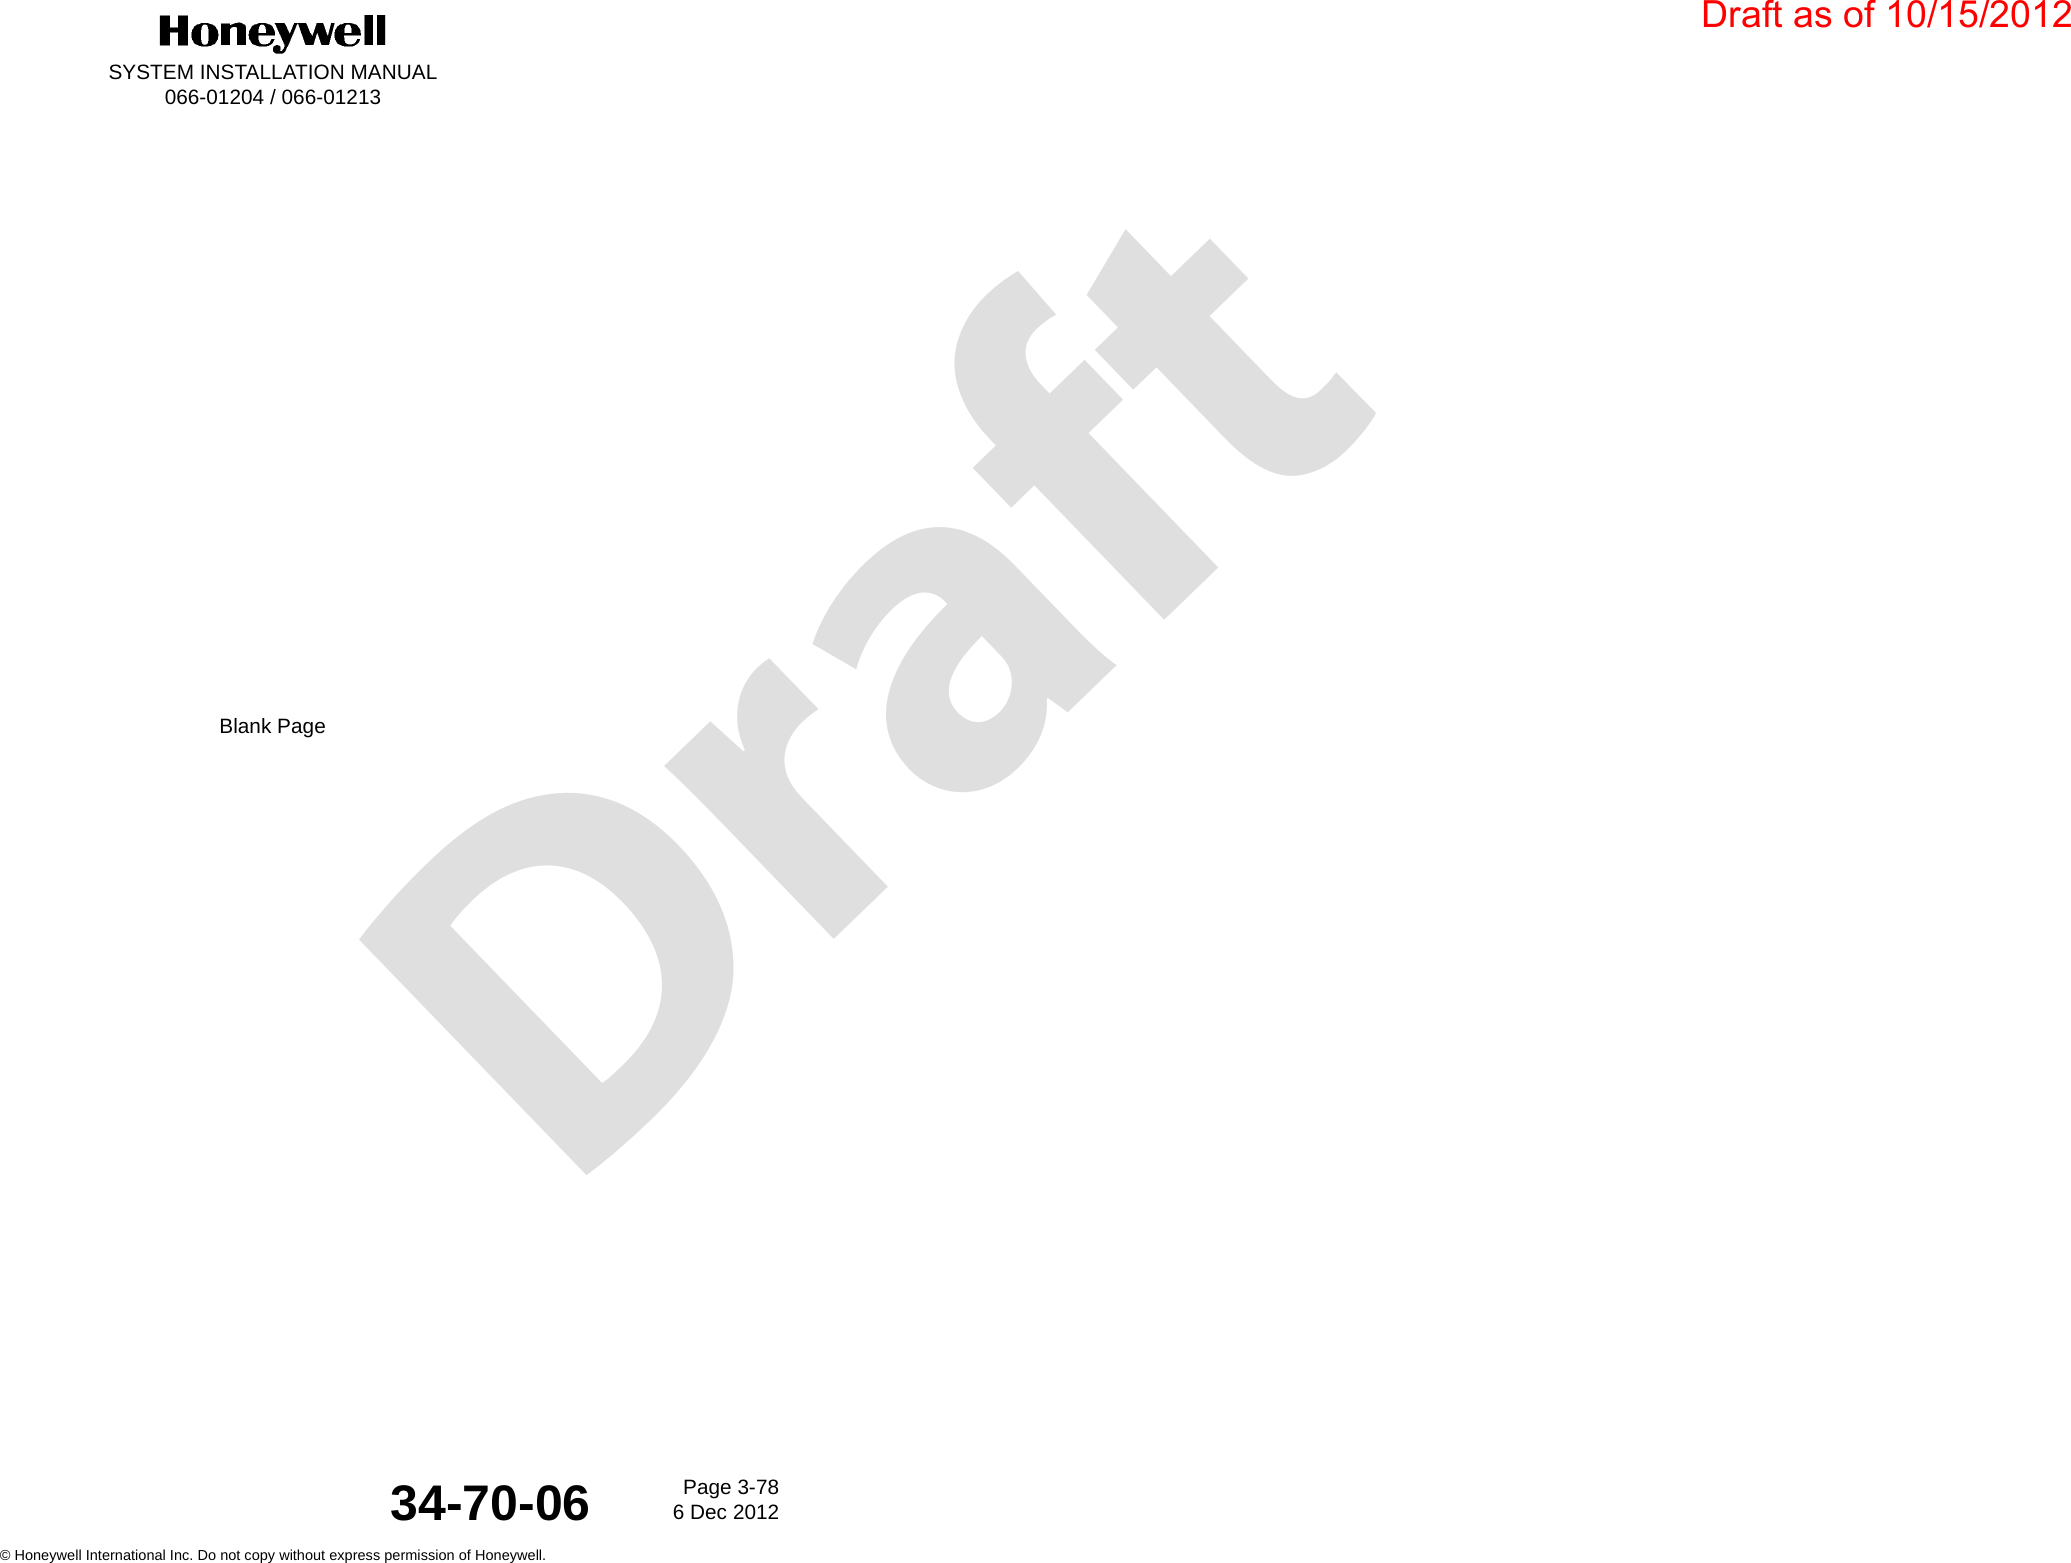 DraftSYSTEM INSTALLATION MANUAL066-01204 / 066-01213Page 3-786 Dec 2012© Honeywell International Inc. Do not copy without express permission of Honeywell.34-70-06Blank PageDraft as of 10/15/2012